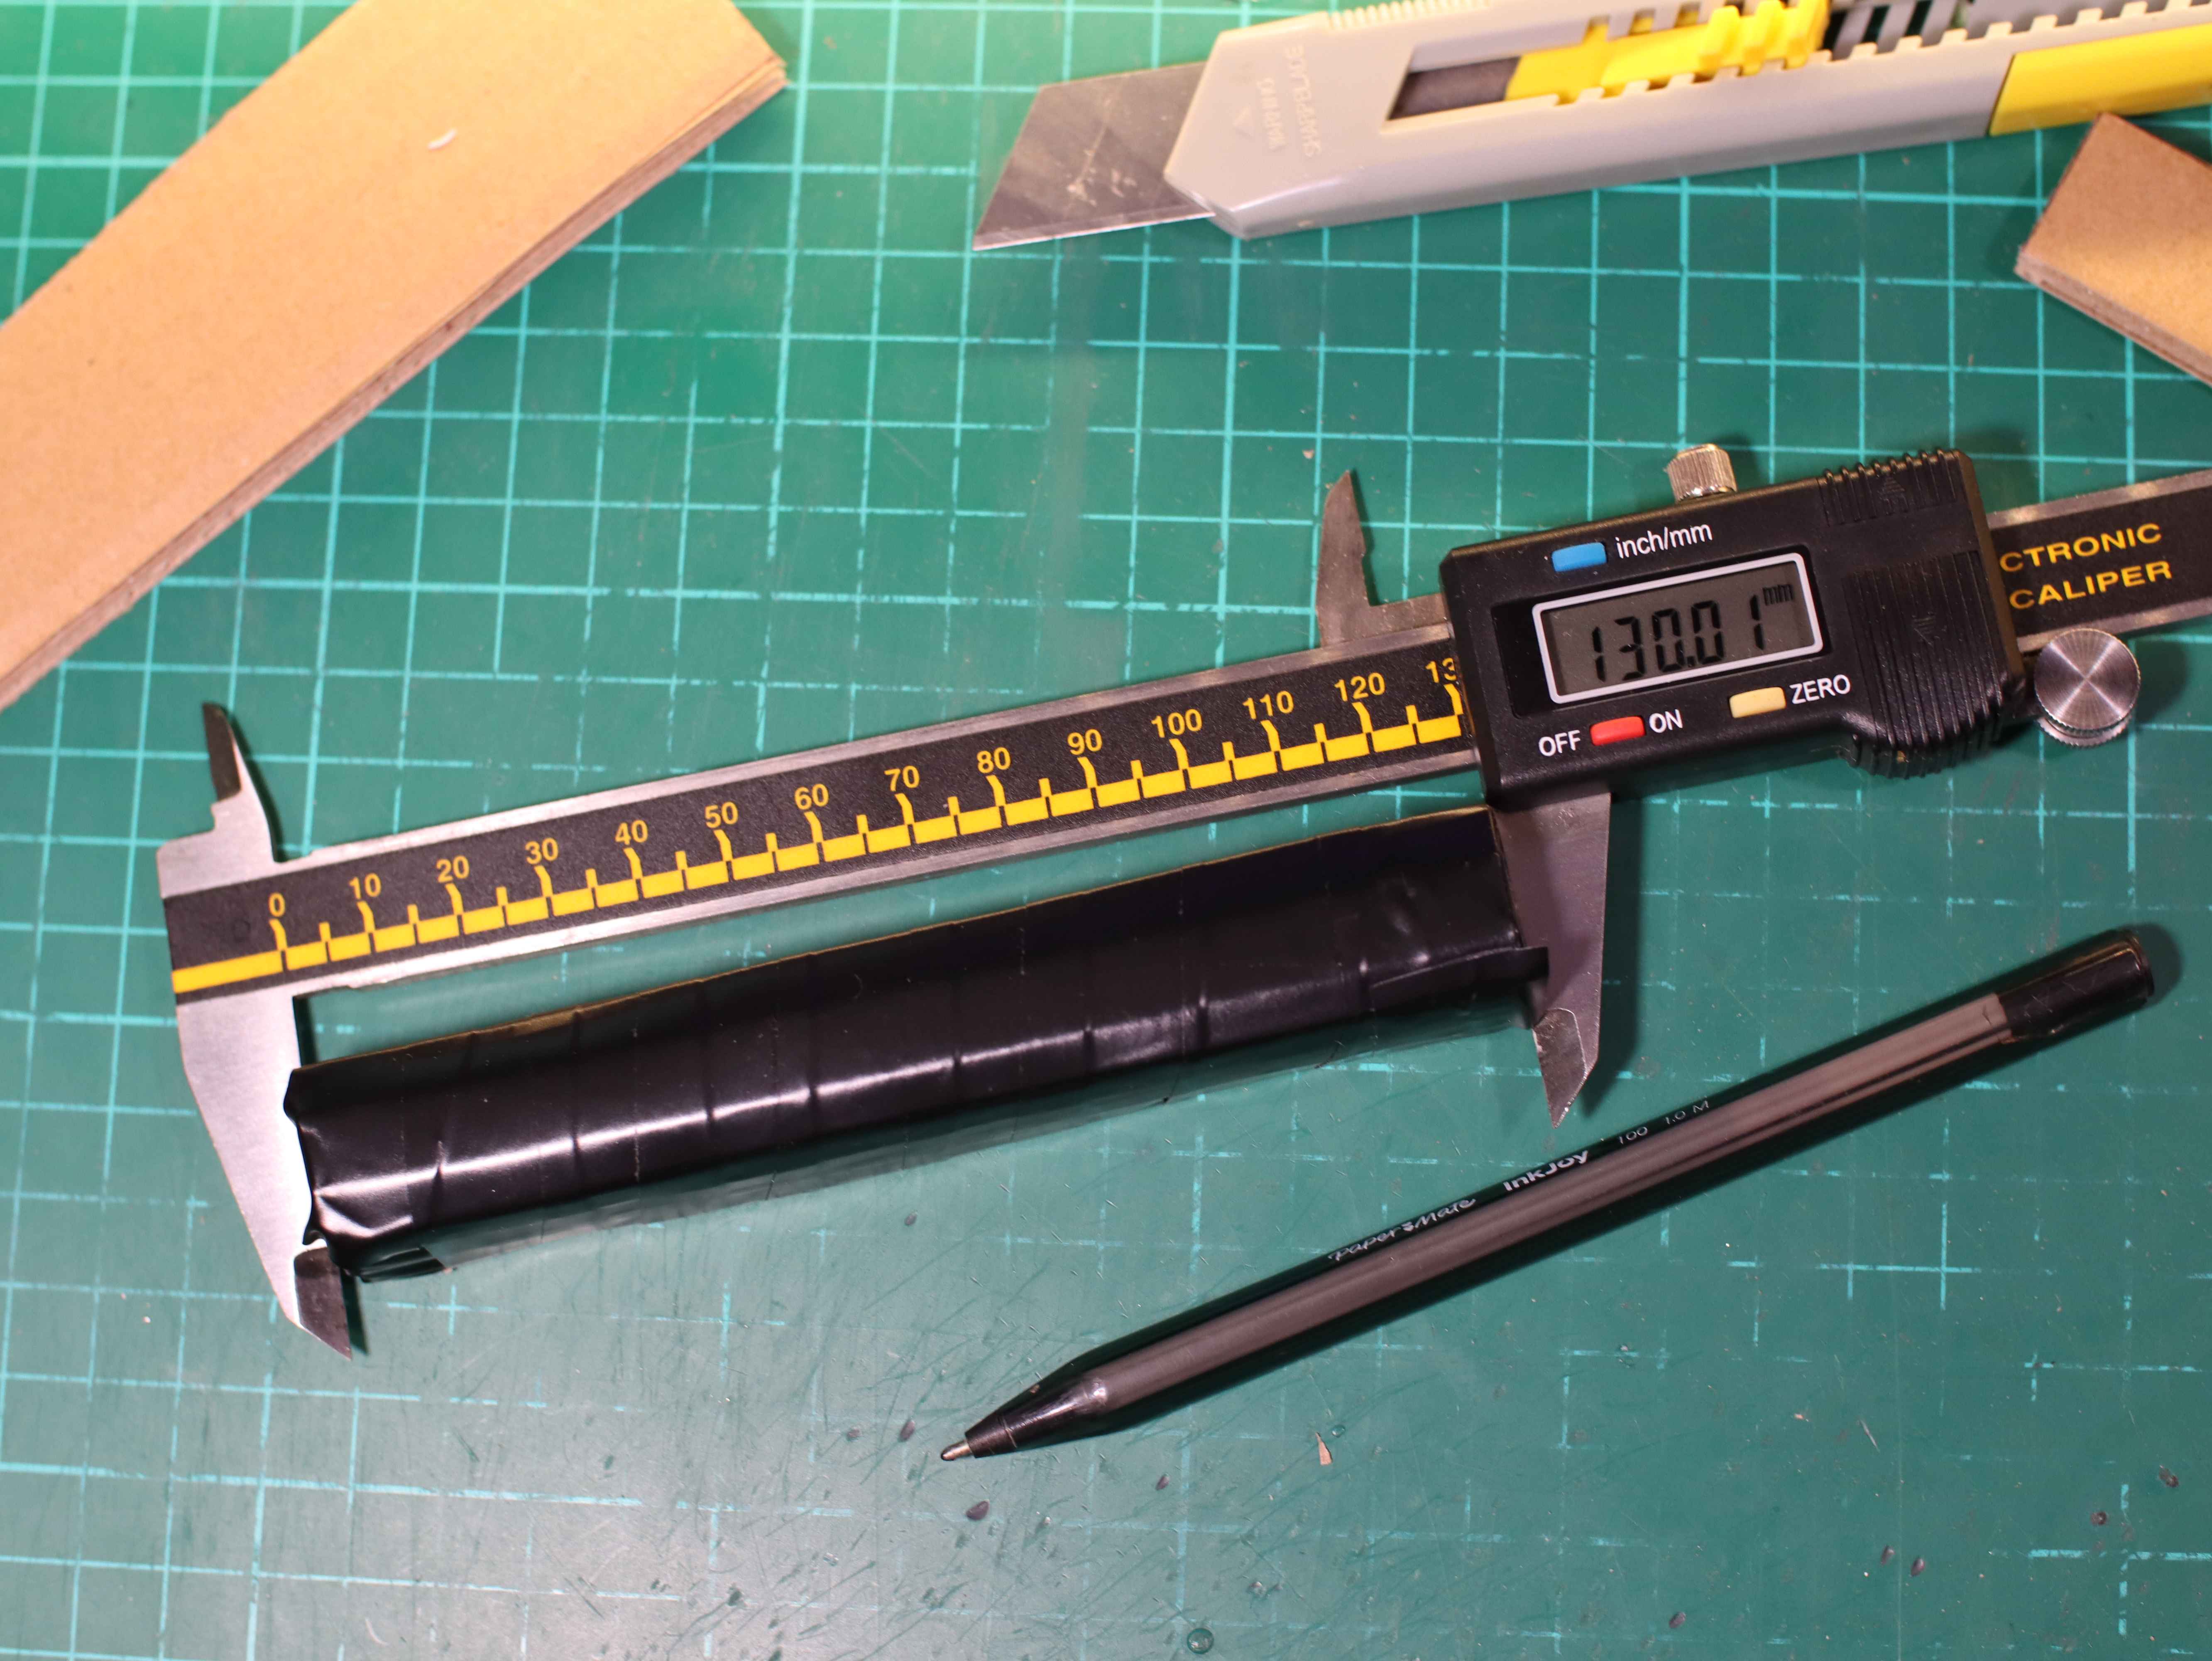 Measurement of the length of the airsoft battery model from the cardboard. The model is covered with black insulating tape, the caliper, knife and pen lie on the service mat.